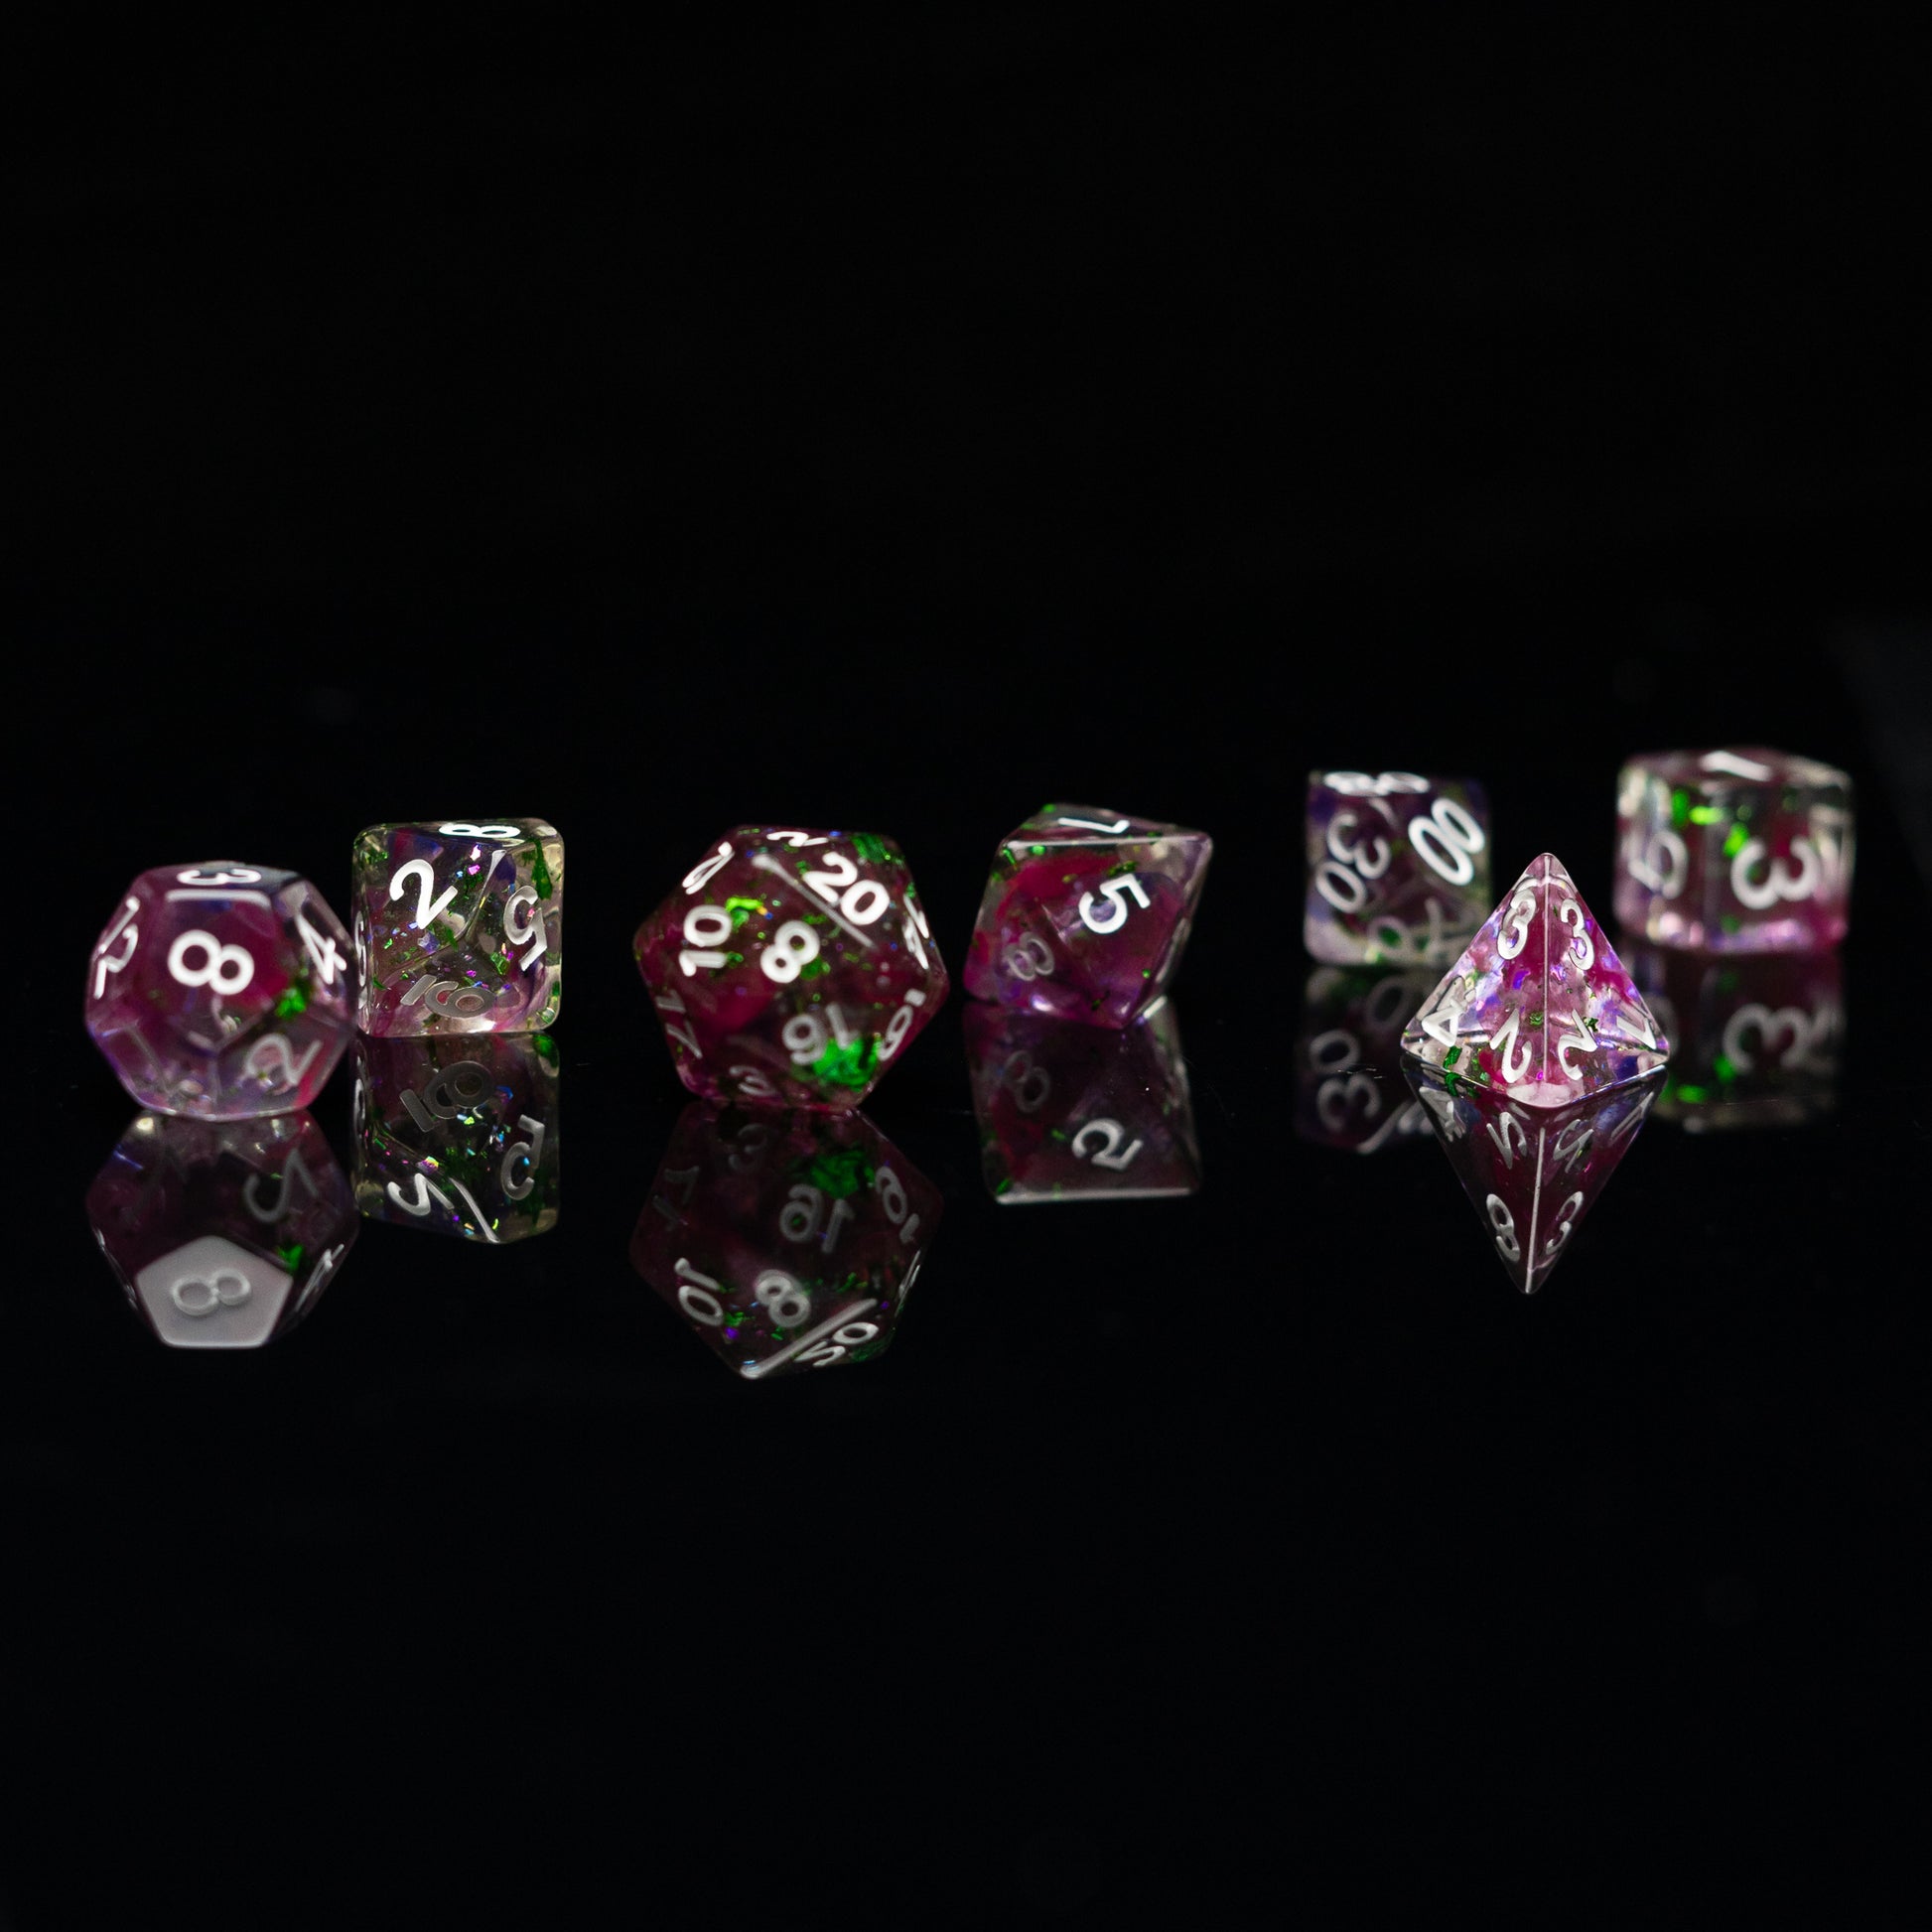 Roll Britannia Malrus and Milo Tosscobble Dnd Dice Set with Swirling Purple and Green Glitter Aesthetic